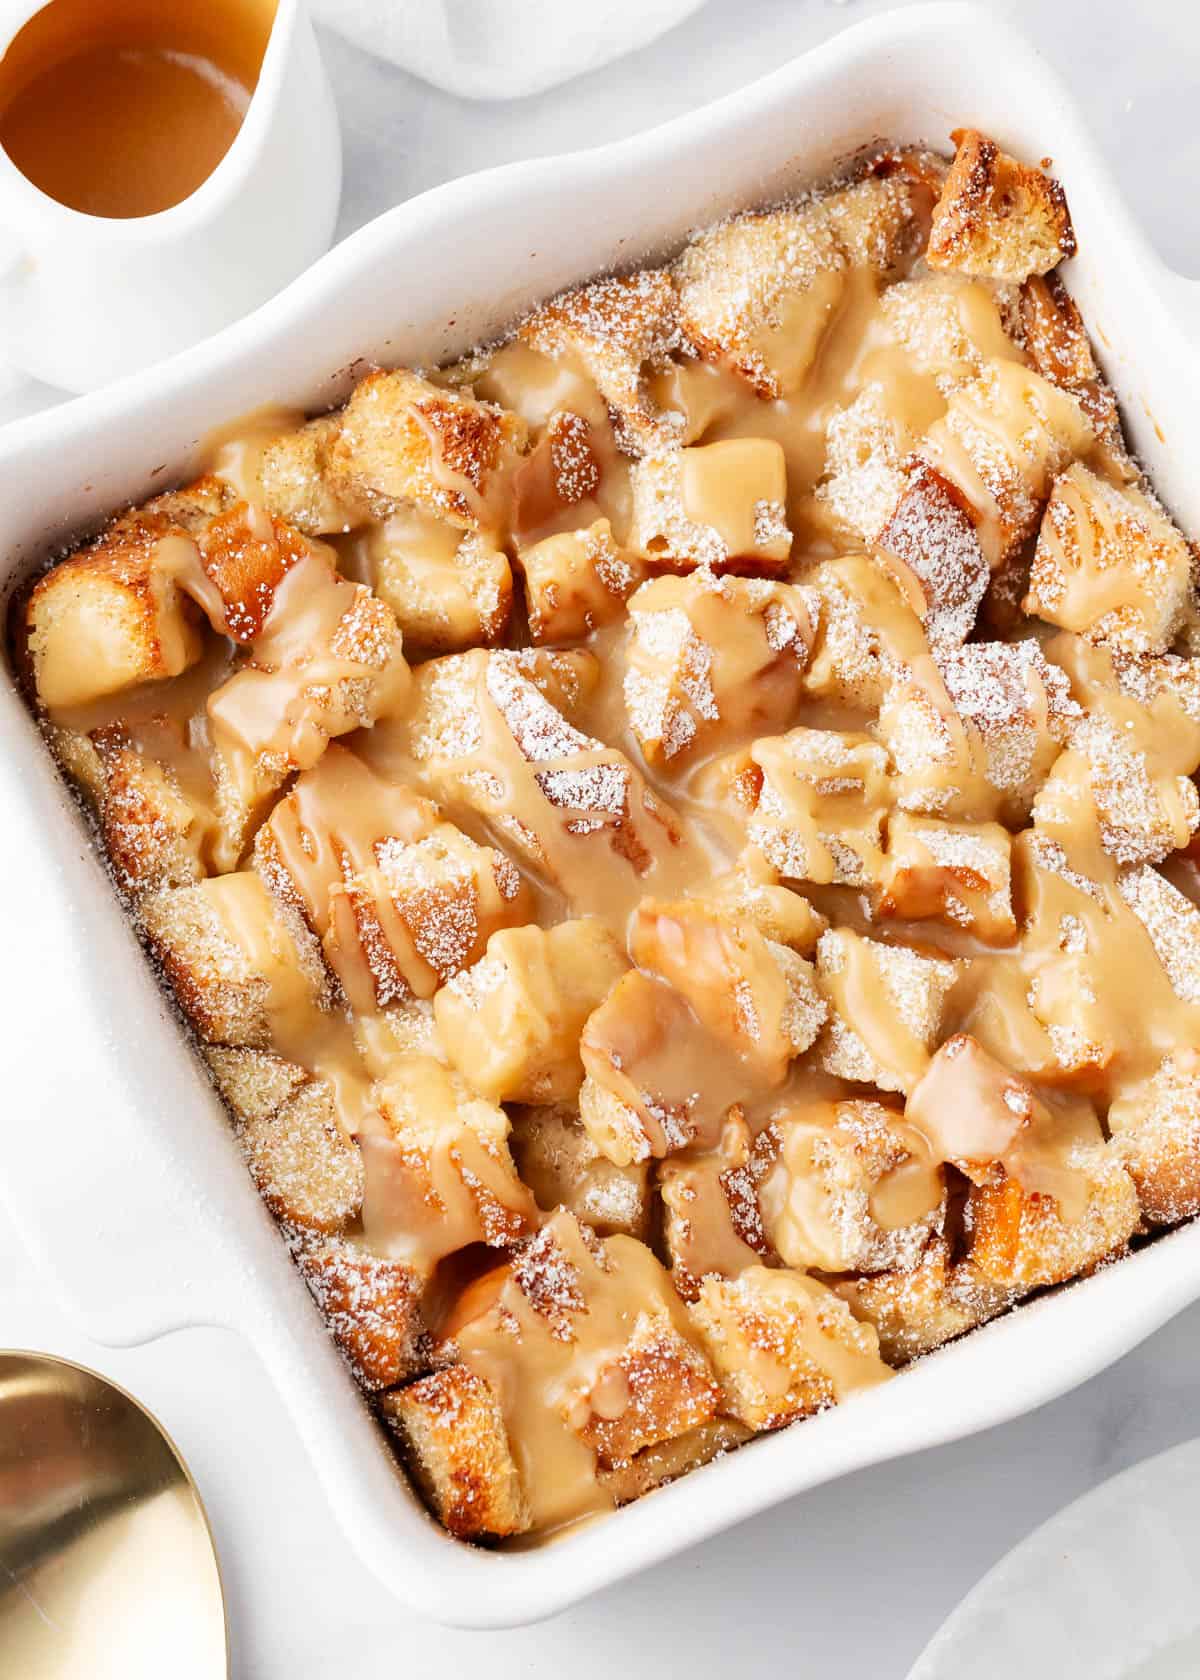 Bread pudding with caramel sauce in a white baking dish.